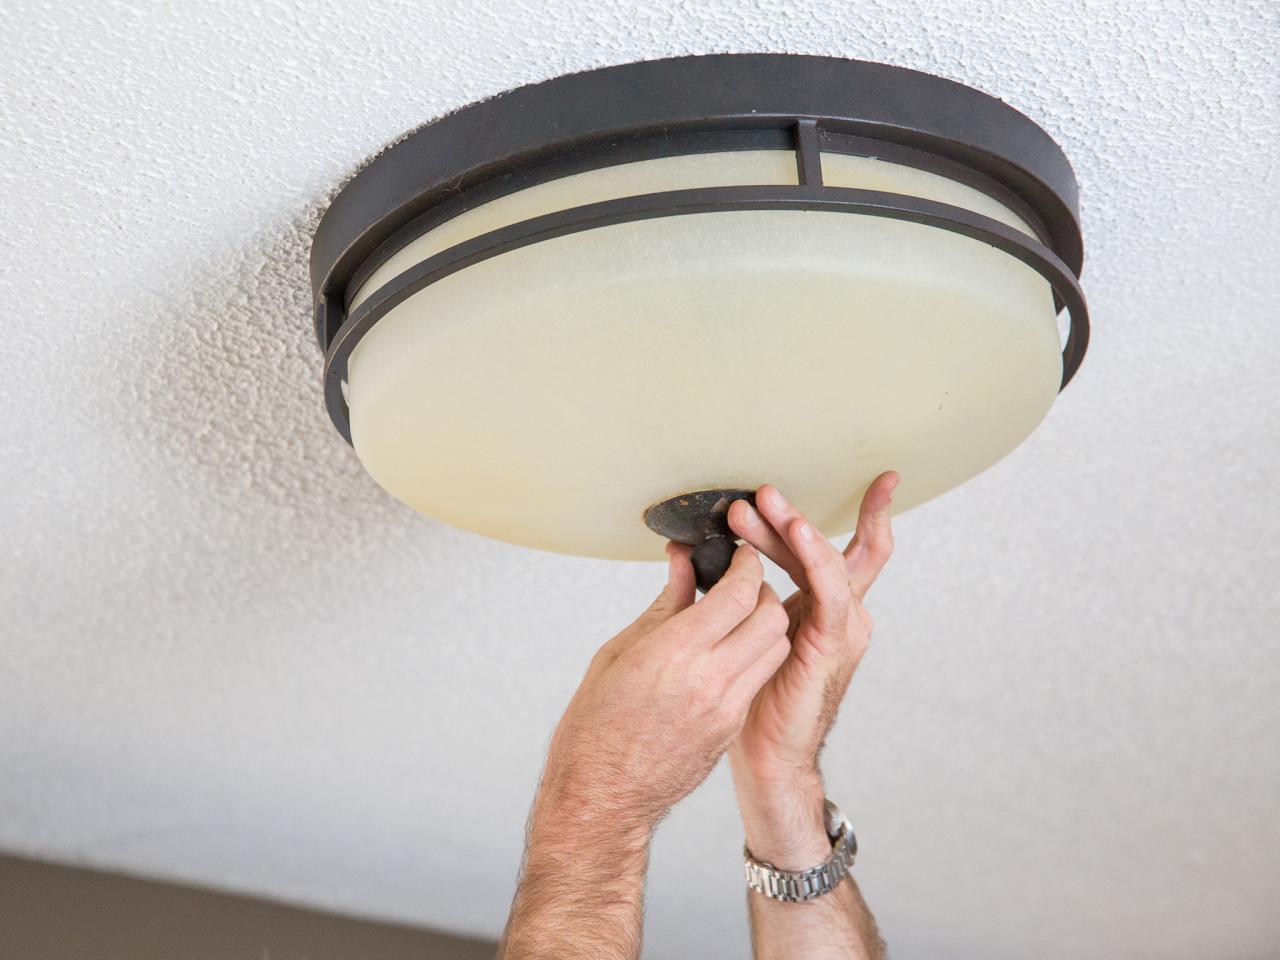 How To Install A Ceiling Fan, How To Install Light Fixture In Ceiling Fan